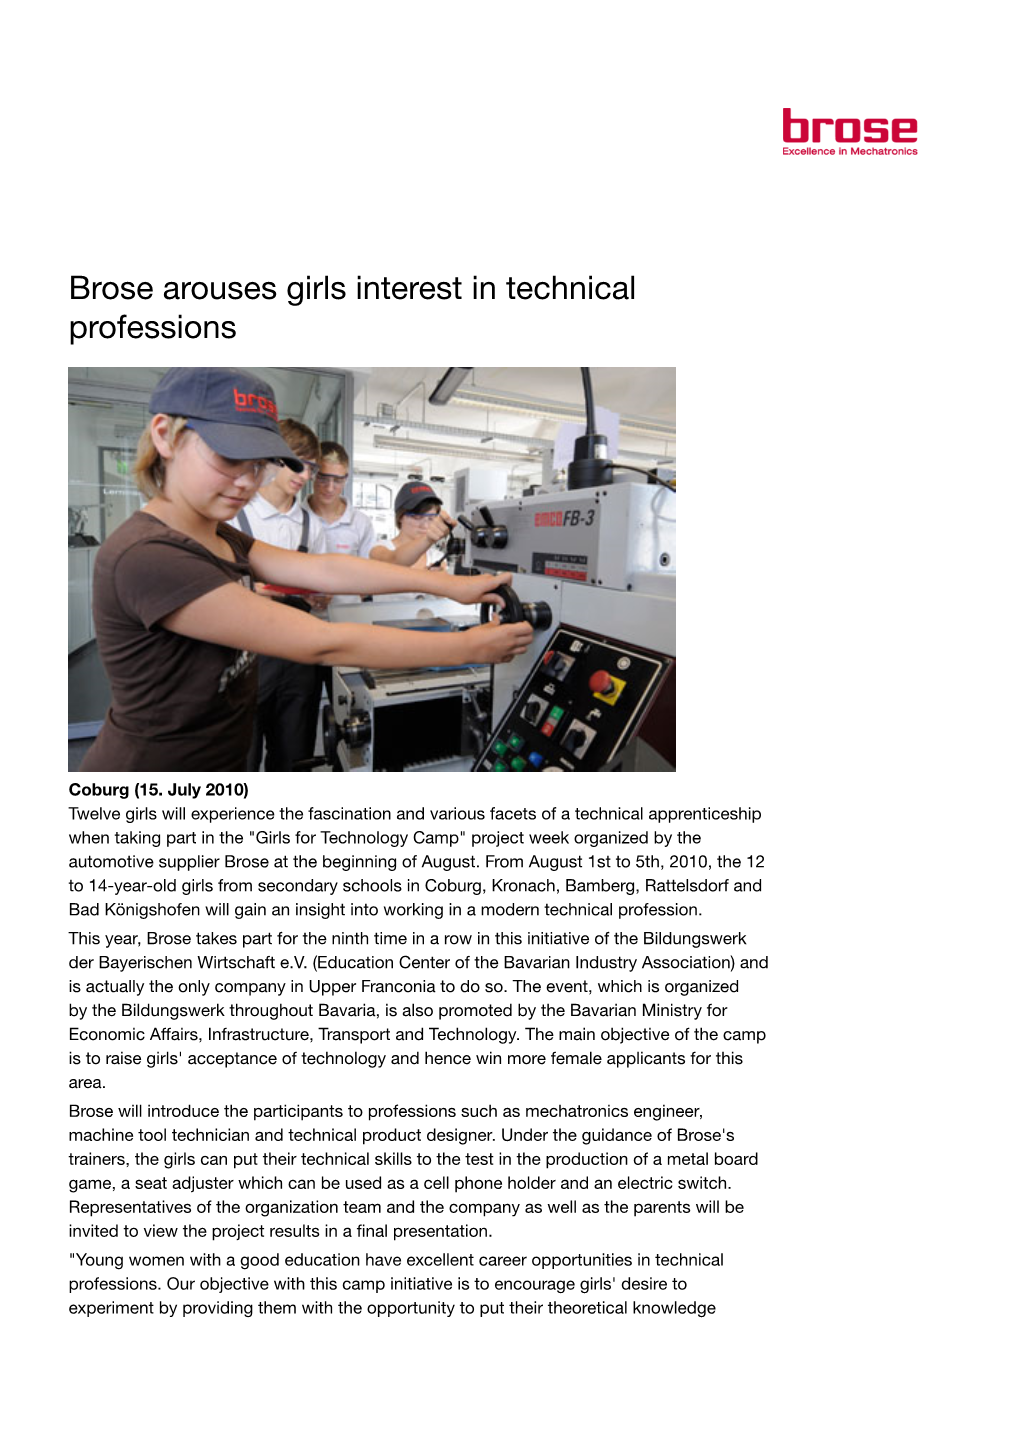 Brose Arouses Girls Interest in Technical Professions